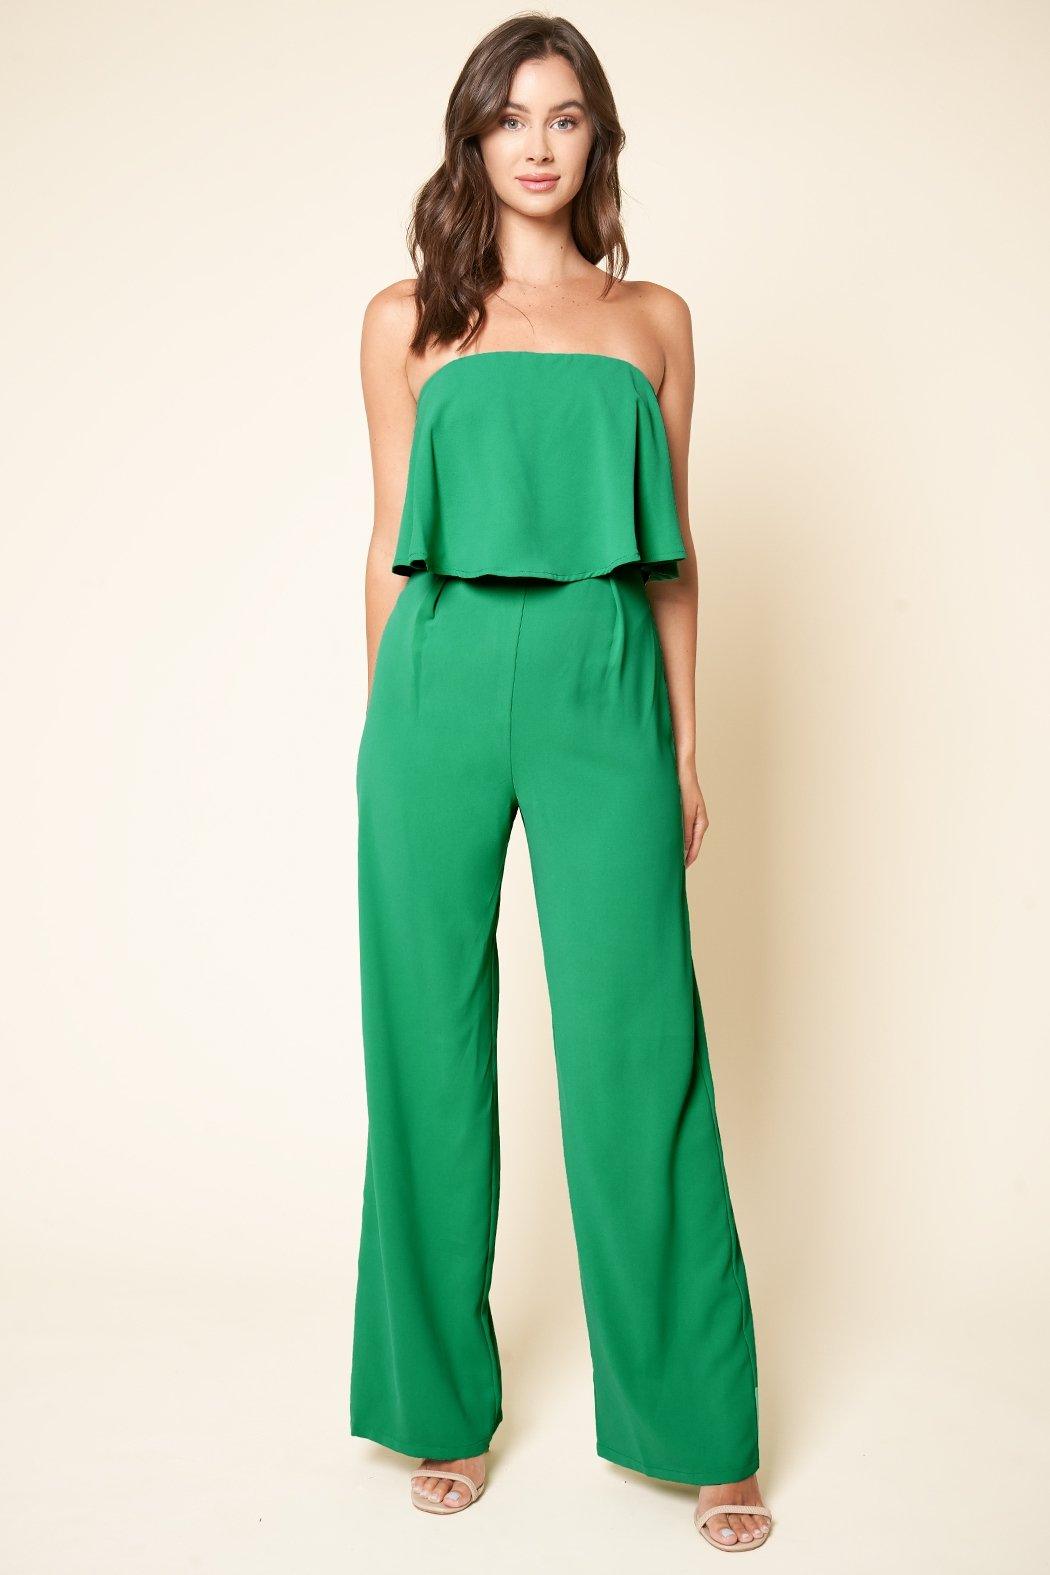 Victoria Green Strapless Jumpsuit from The House of CO-KY - Jumpsuits & Rompers